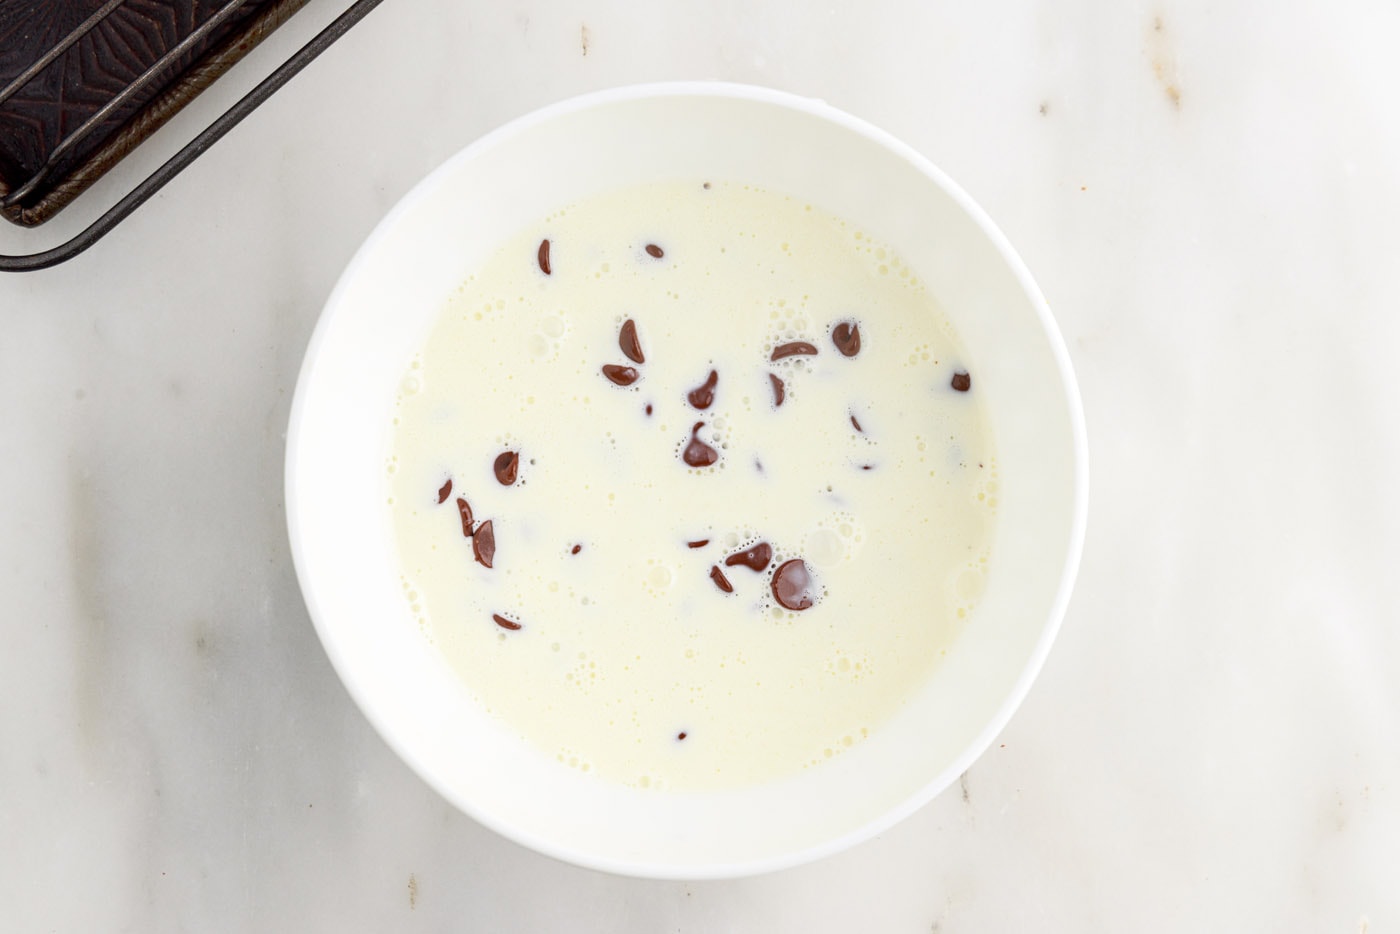 cream and chocolate chips in a bowl